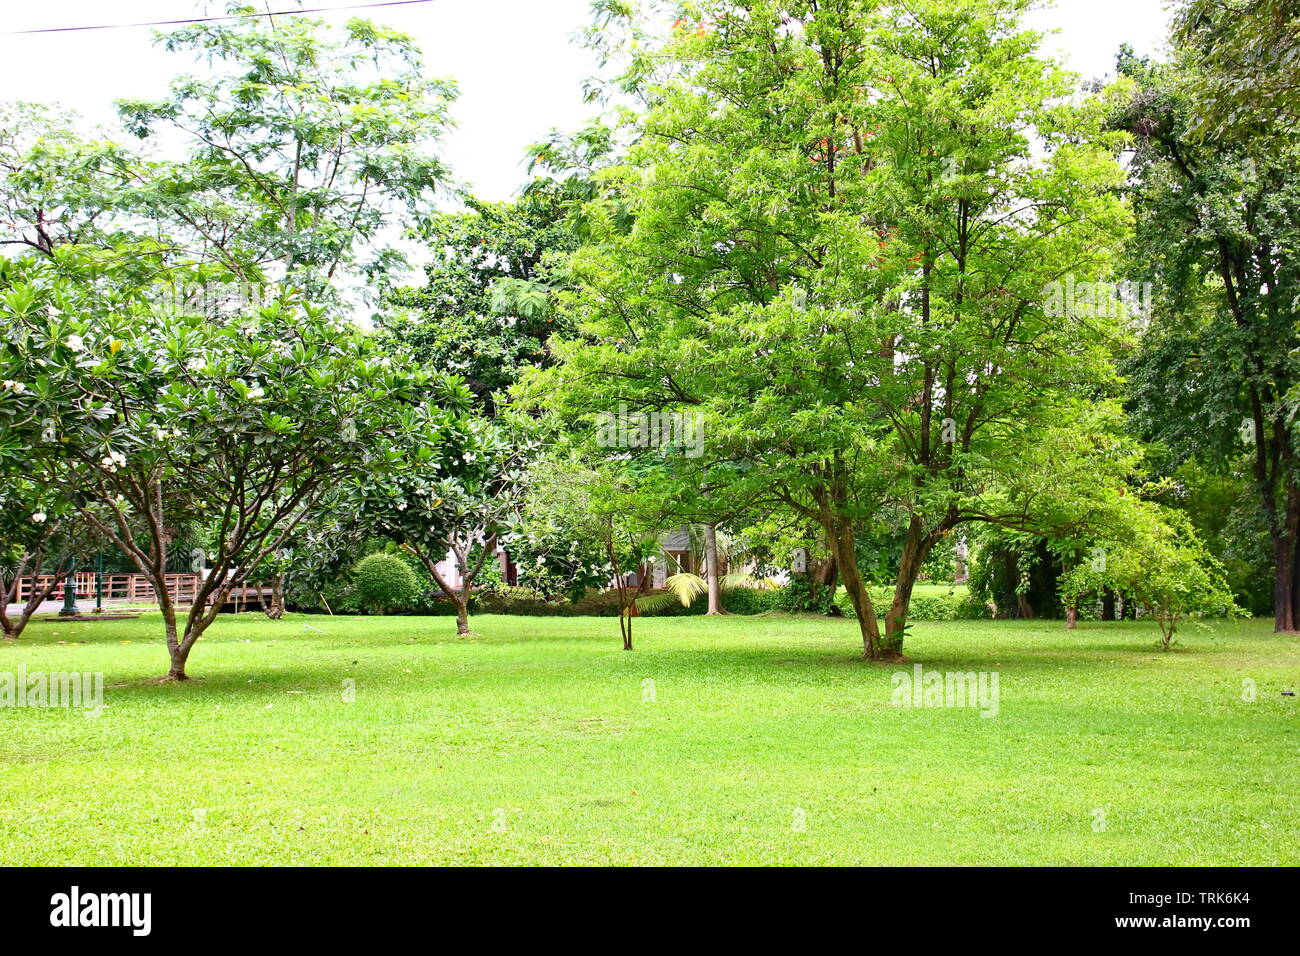 fresh air in park.green area create a good environment in the city for people to have outdoor activities. Stock Photo